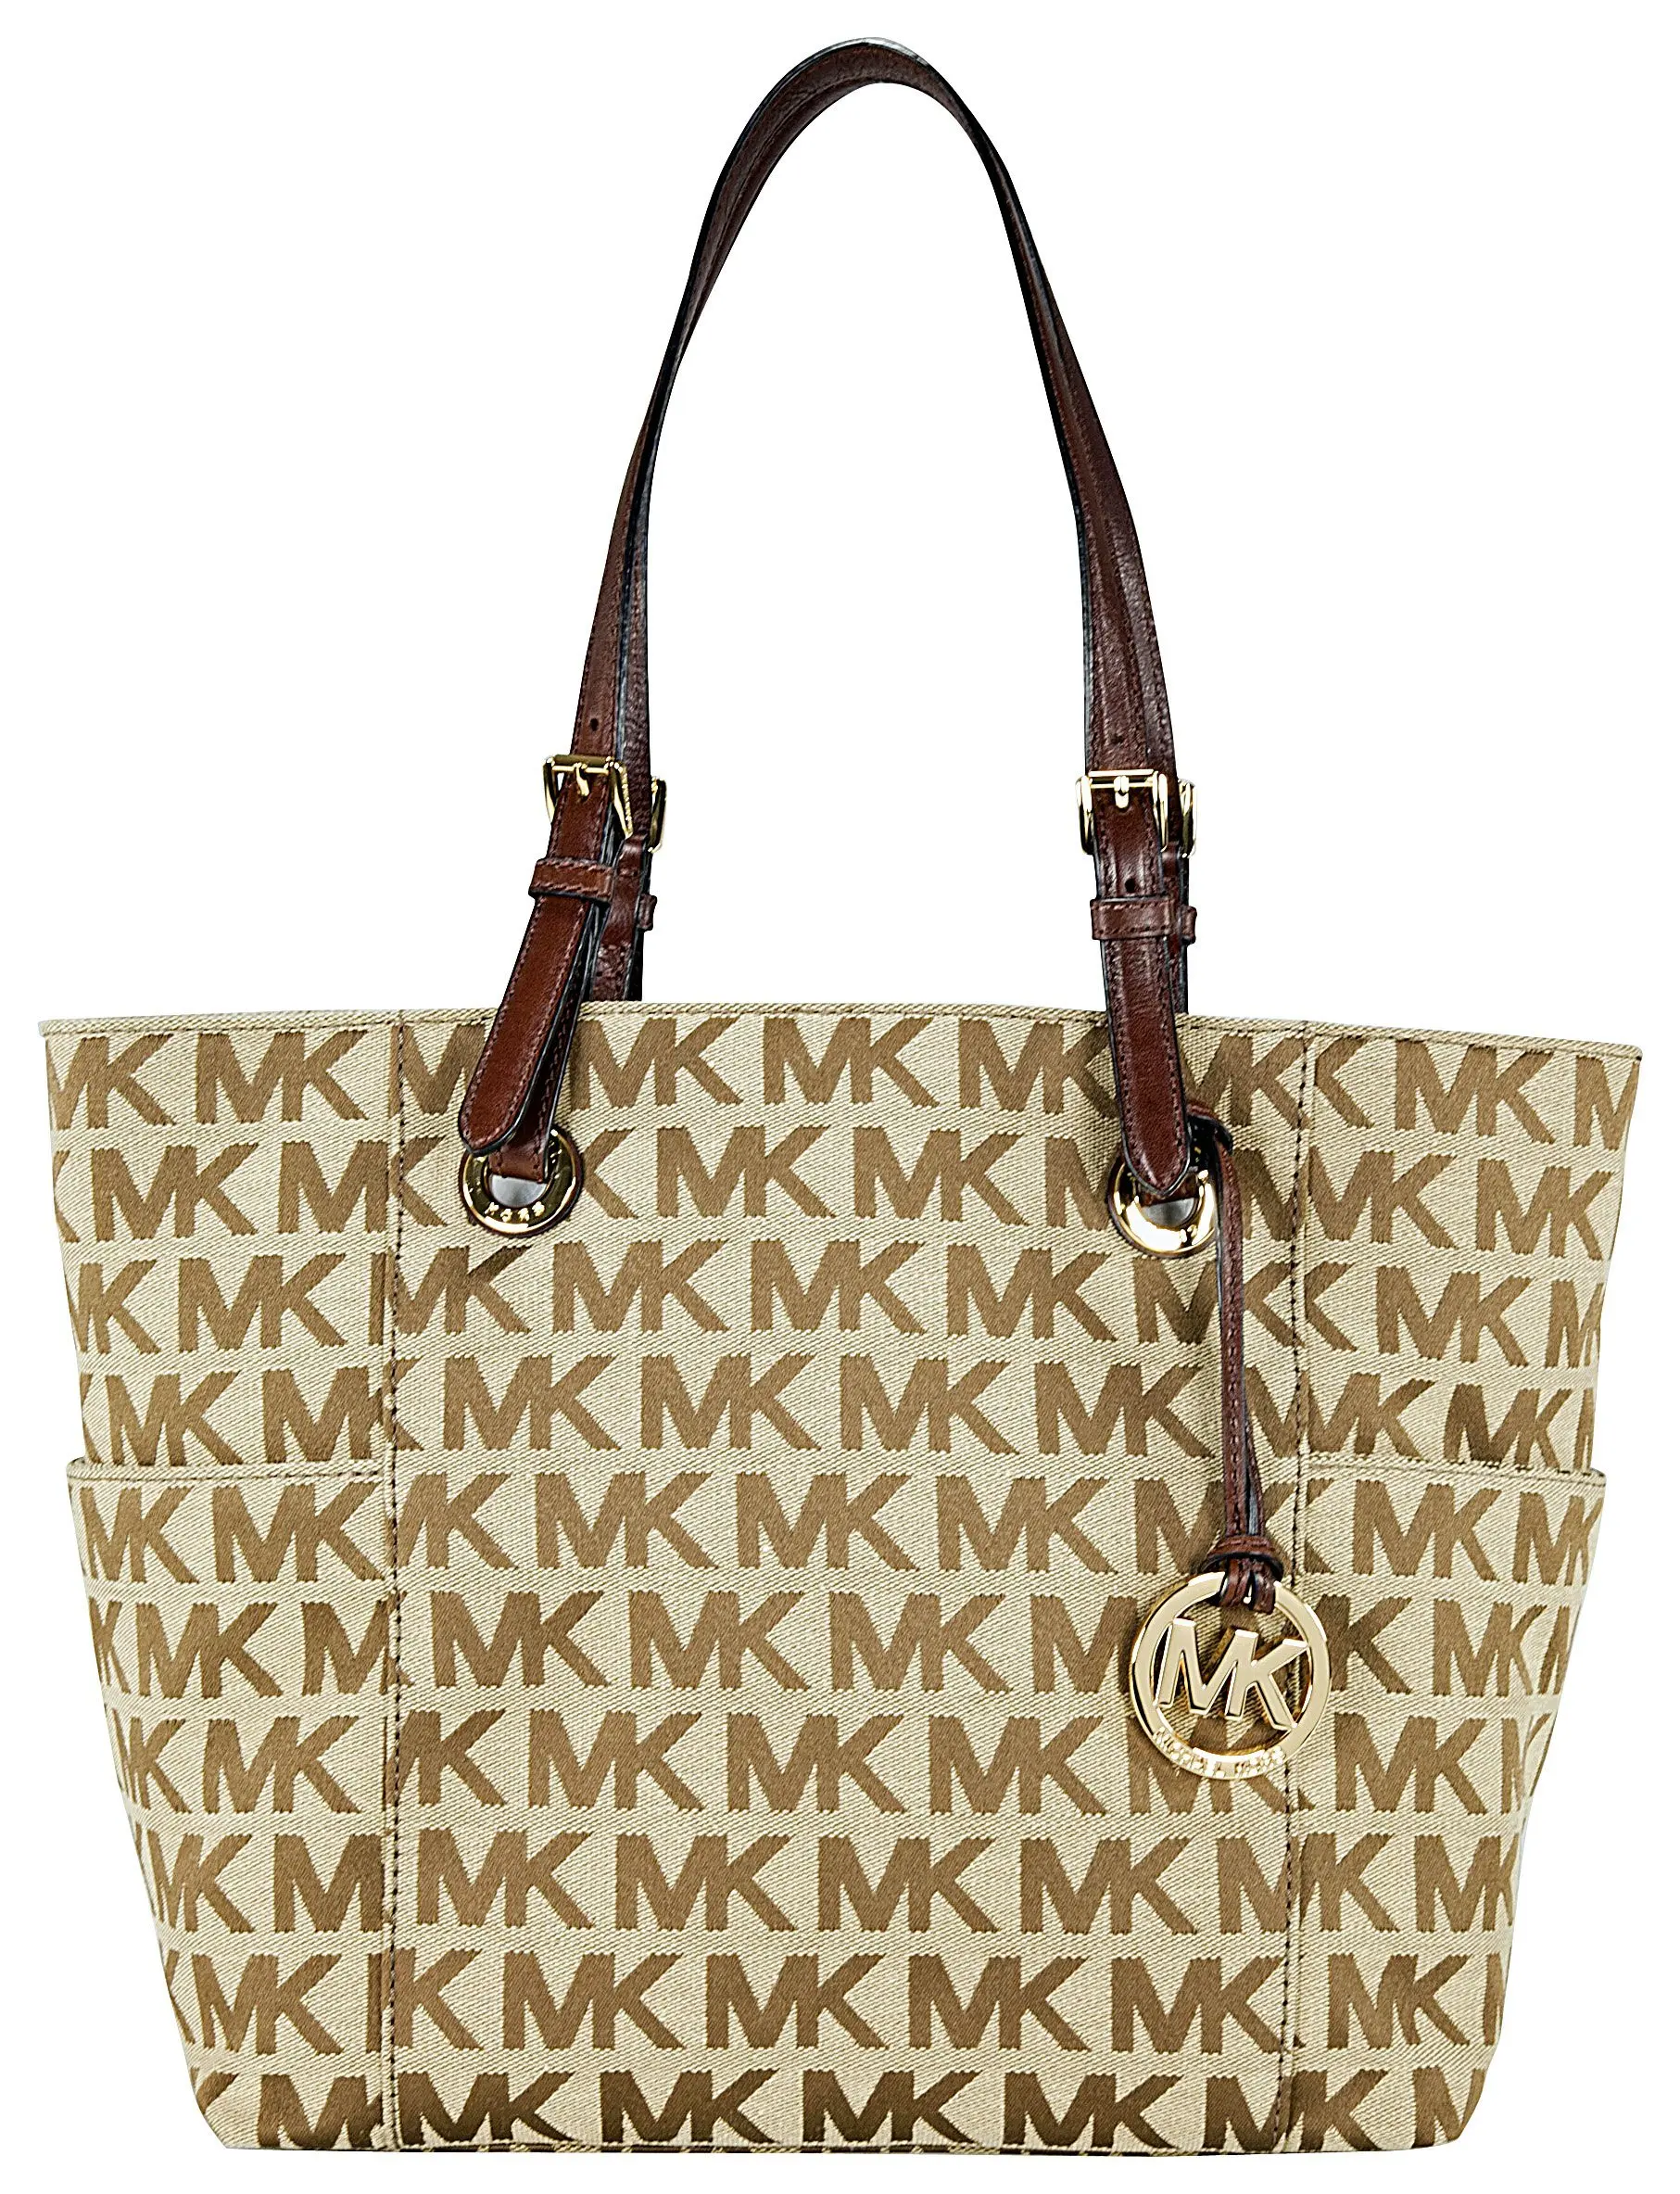 michael kors purse with mk all over it